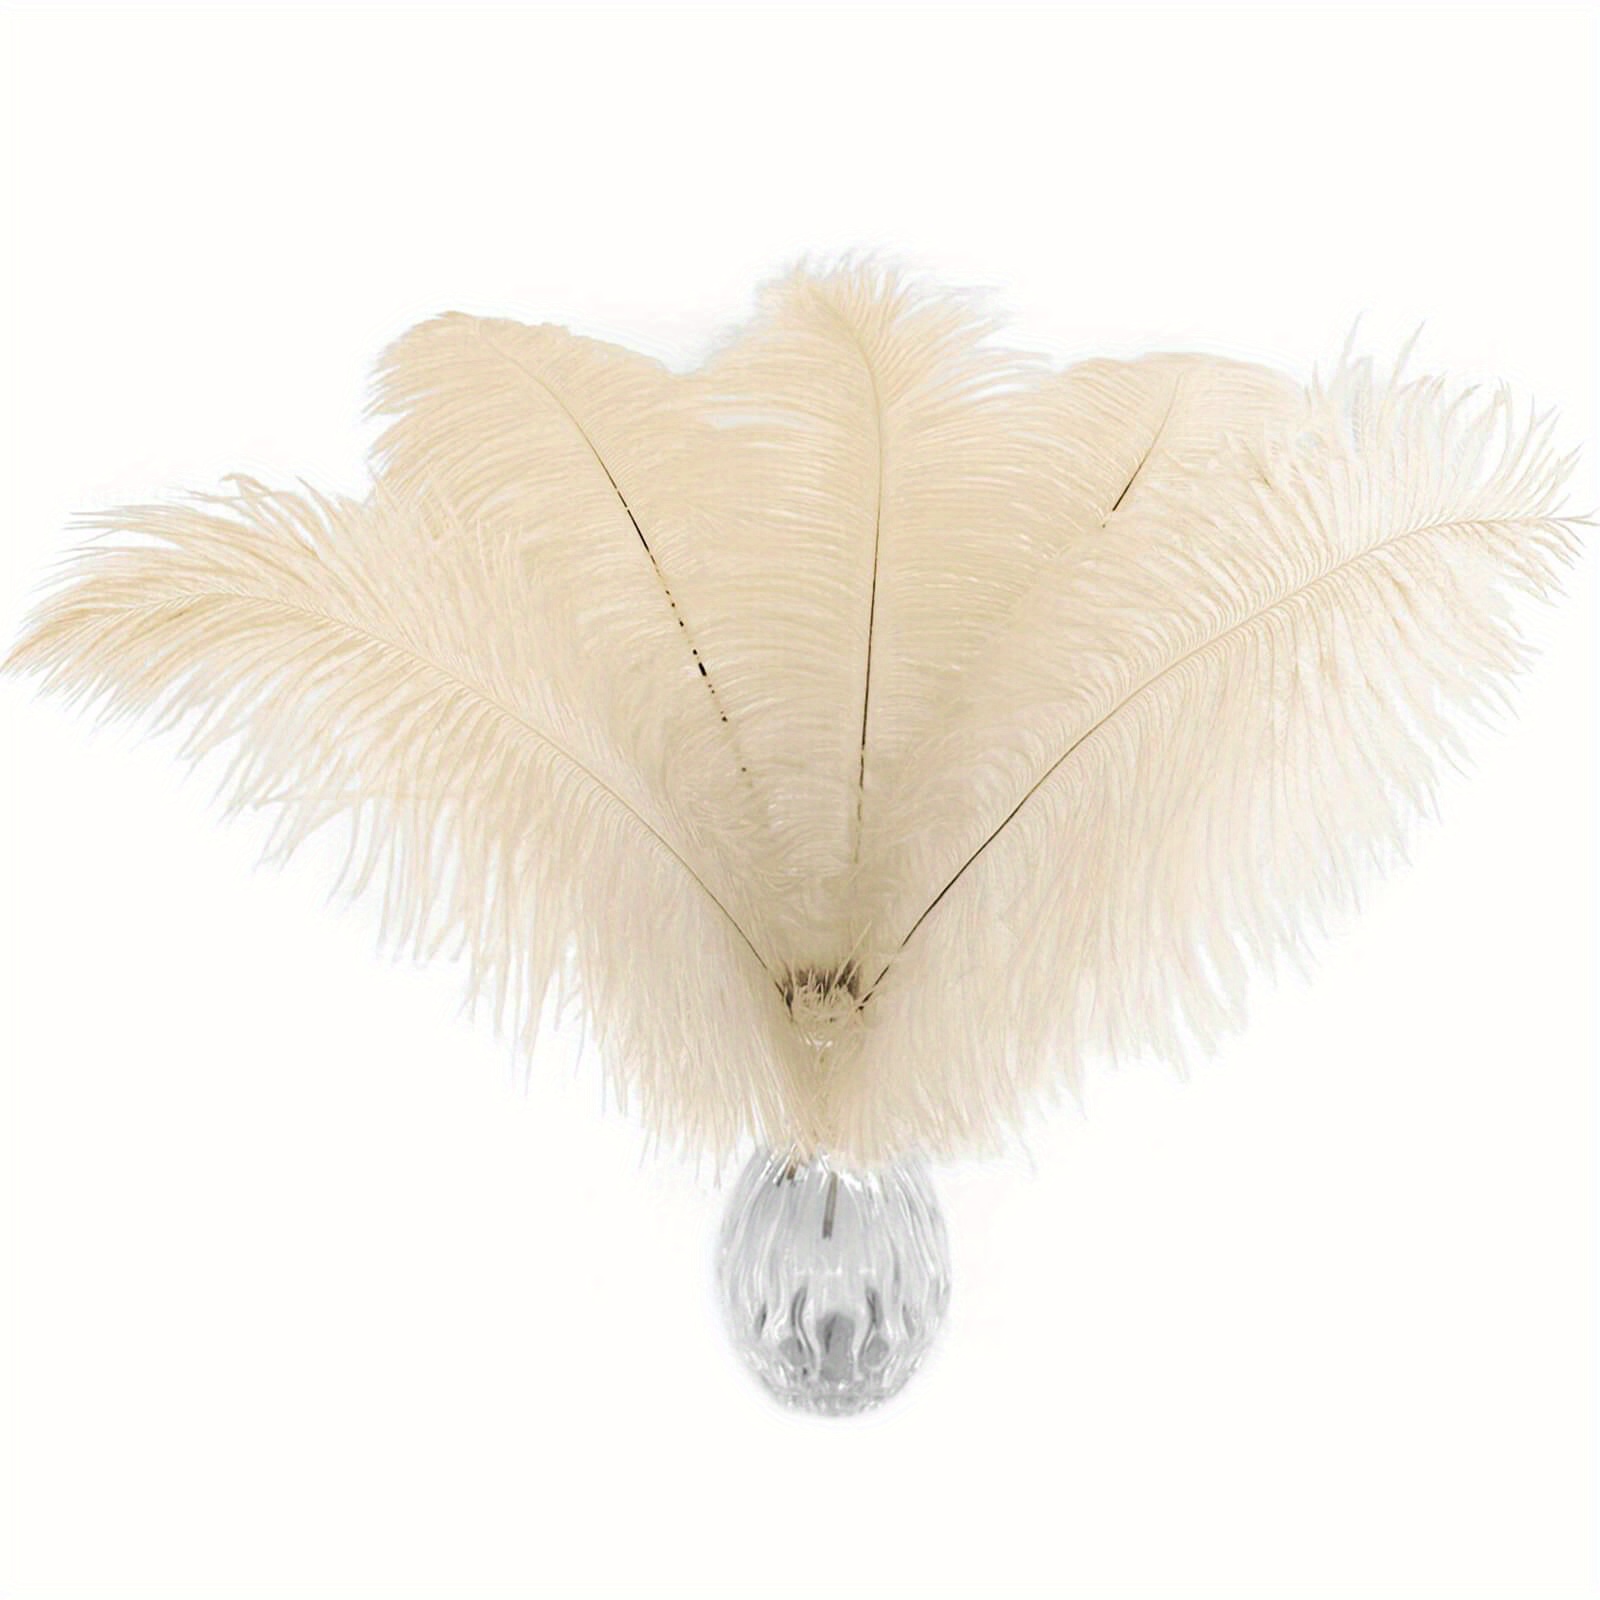 10 pcs 35-40cm/14-16inch Wedding Ostrich Feathers Crafts White Large DIY  Plume